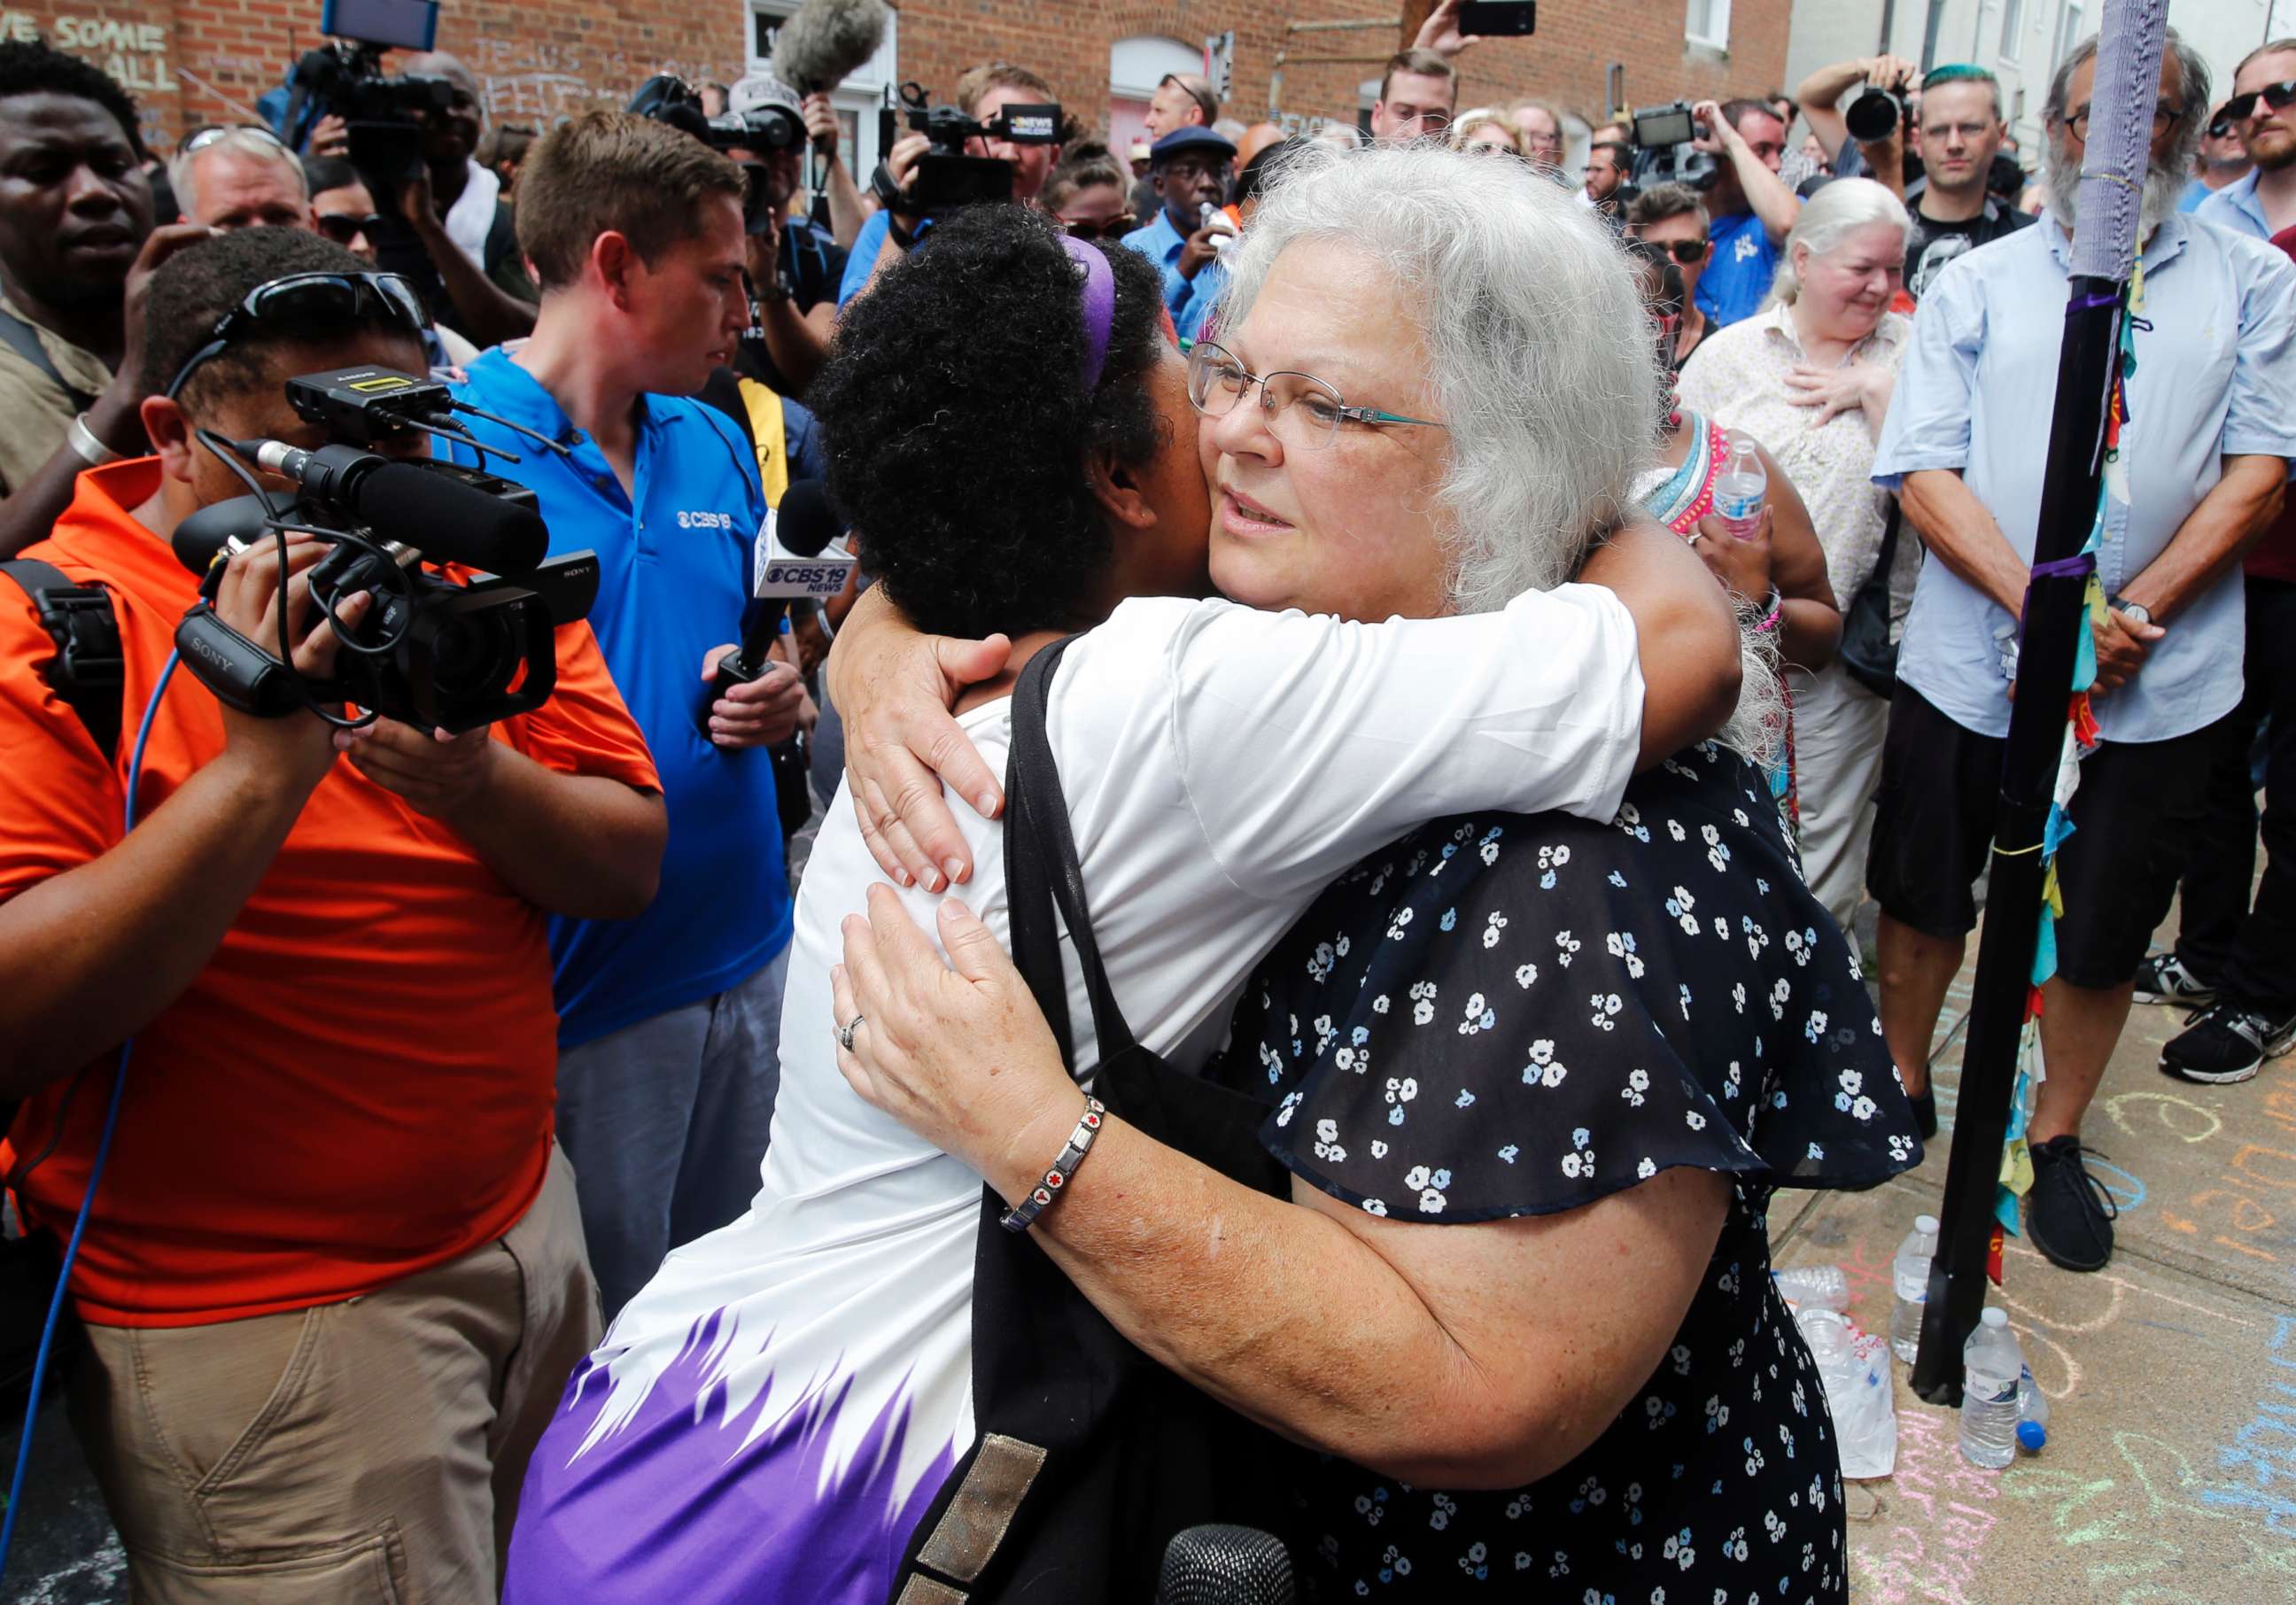 PHOTO: Susan Bro, the mother of Heather Heyer who was killed during last year's "Unite the Right" rally, embraces supporters after laying flowers at the spot her daughter was killed in Charlottesville, Va., Aug. 12, 2018.